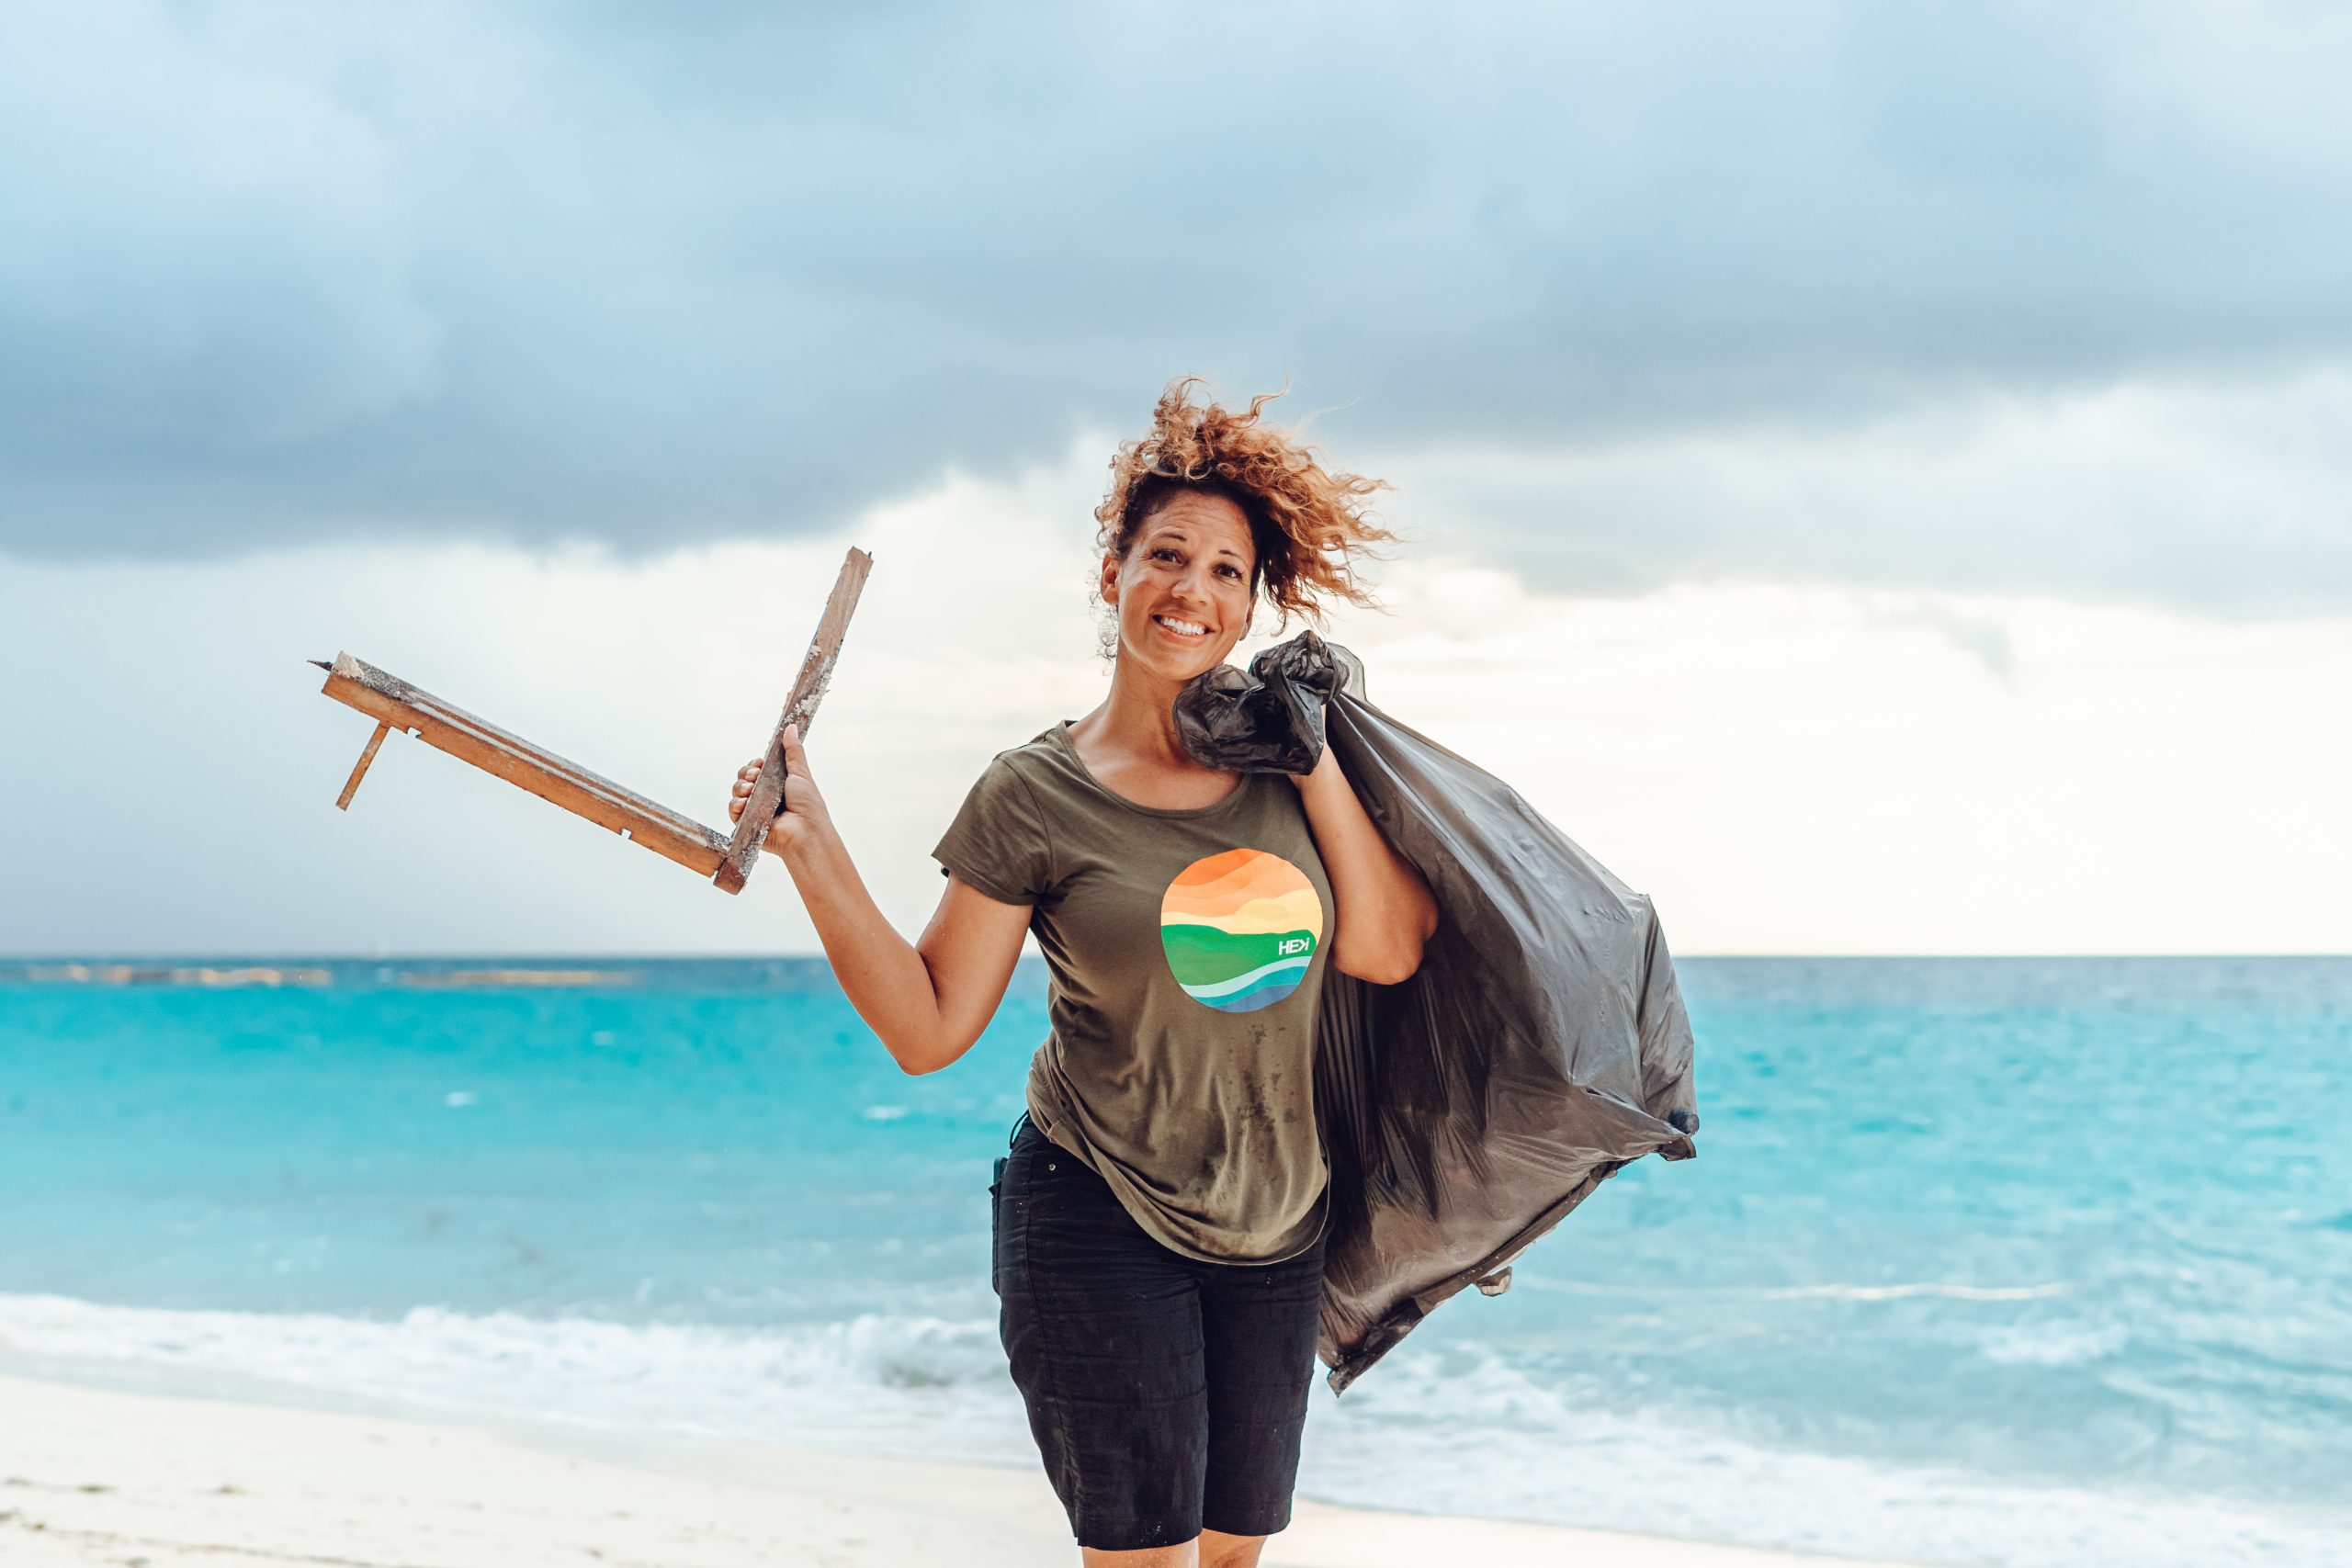 A young woman posing with the debris she's collected from the beach in the Maldives.